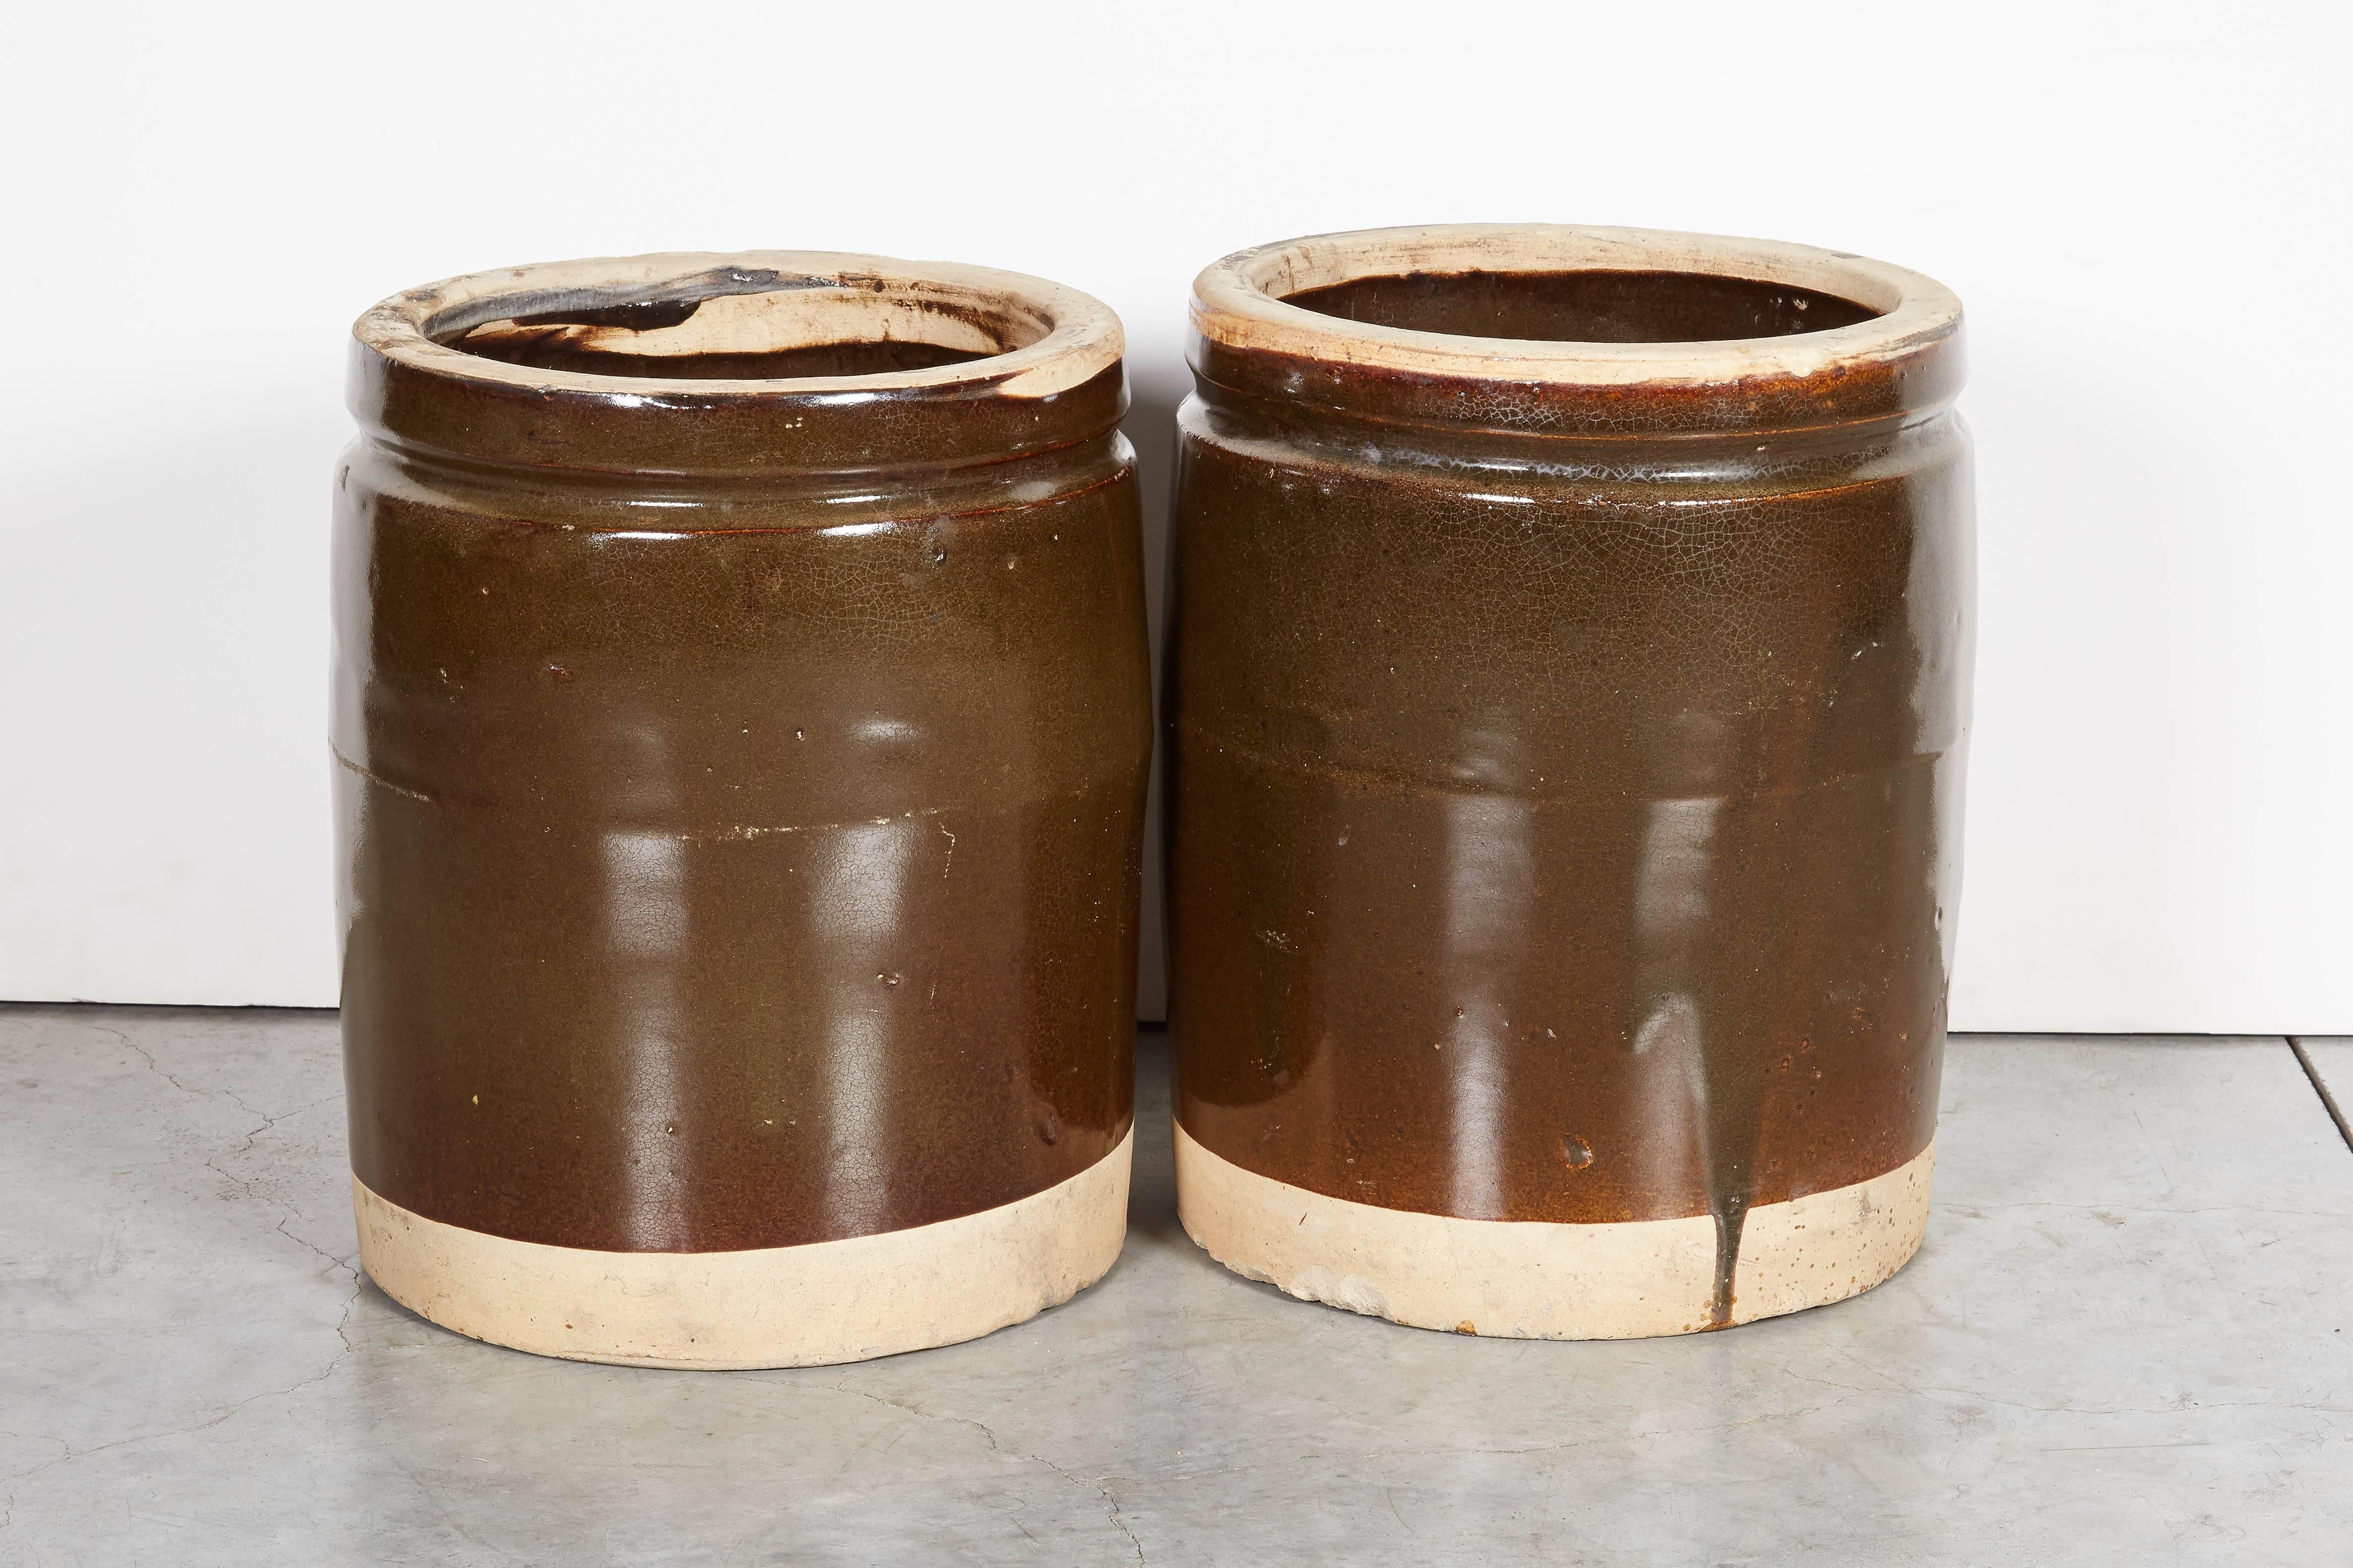 Two beautifully glazed vintage Chinese ceramic food jars with a simple shape that will enhance any contemporary interior. These thick walled jars have real heft and presence. From Shanxi Province. Priced individually.
CR695
